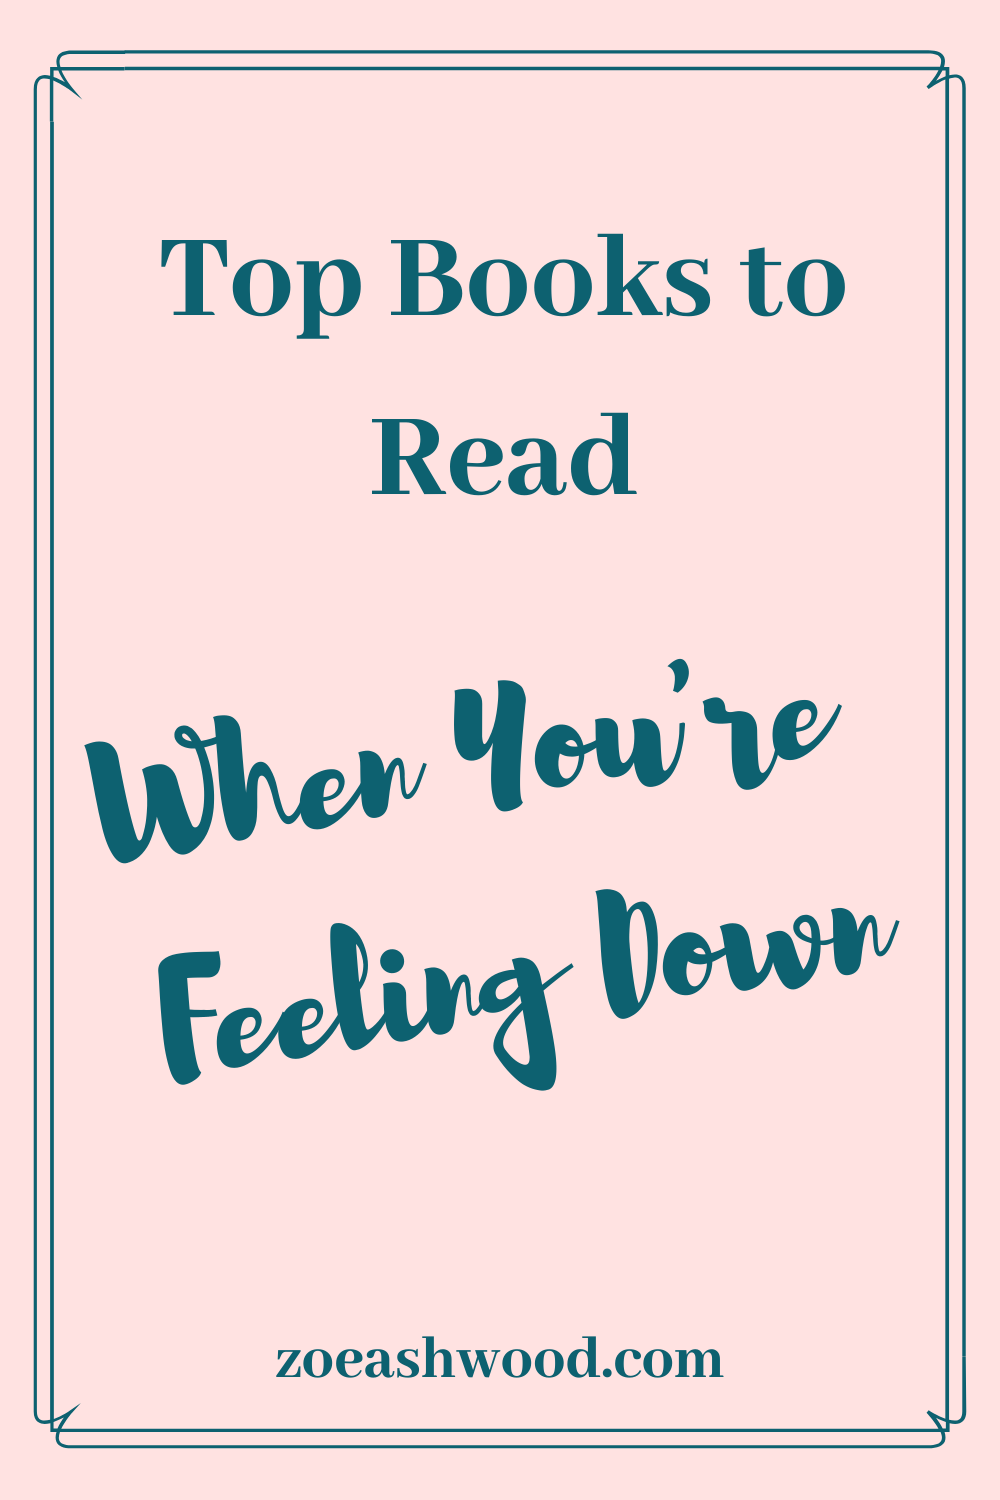 Top Books To Read When You're Felling Down - Zoe Ashwood